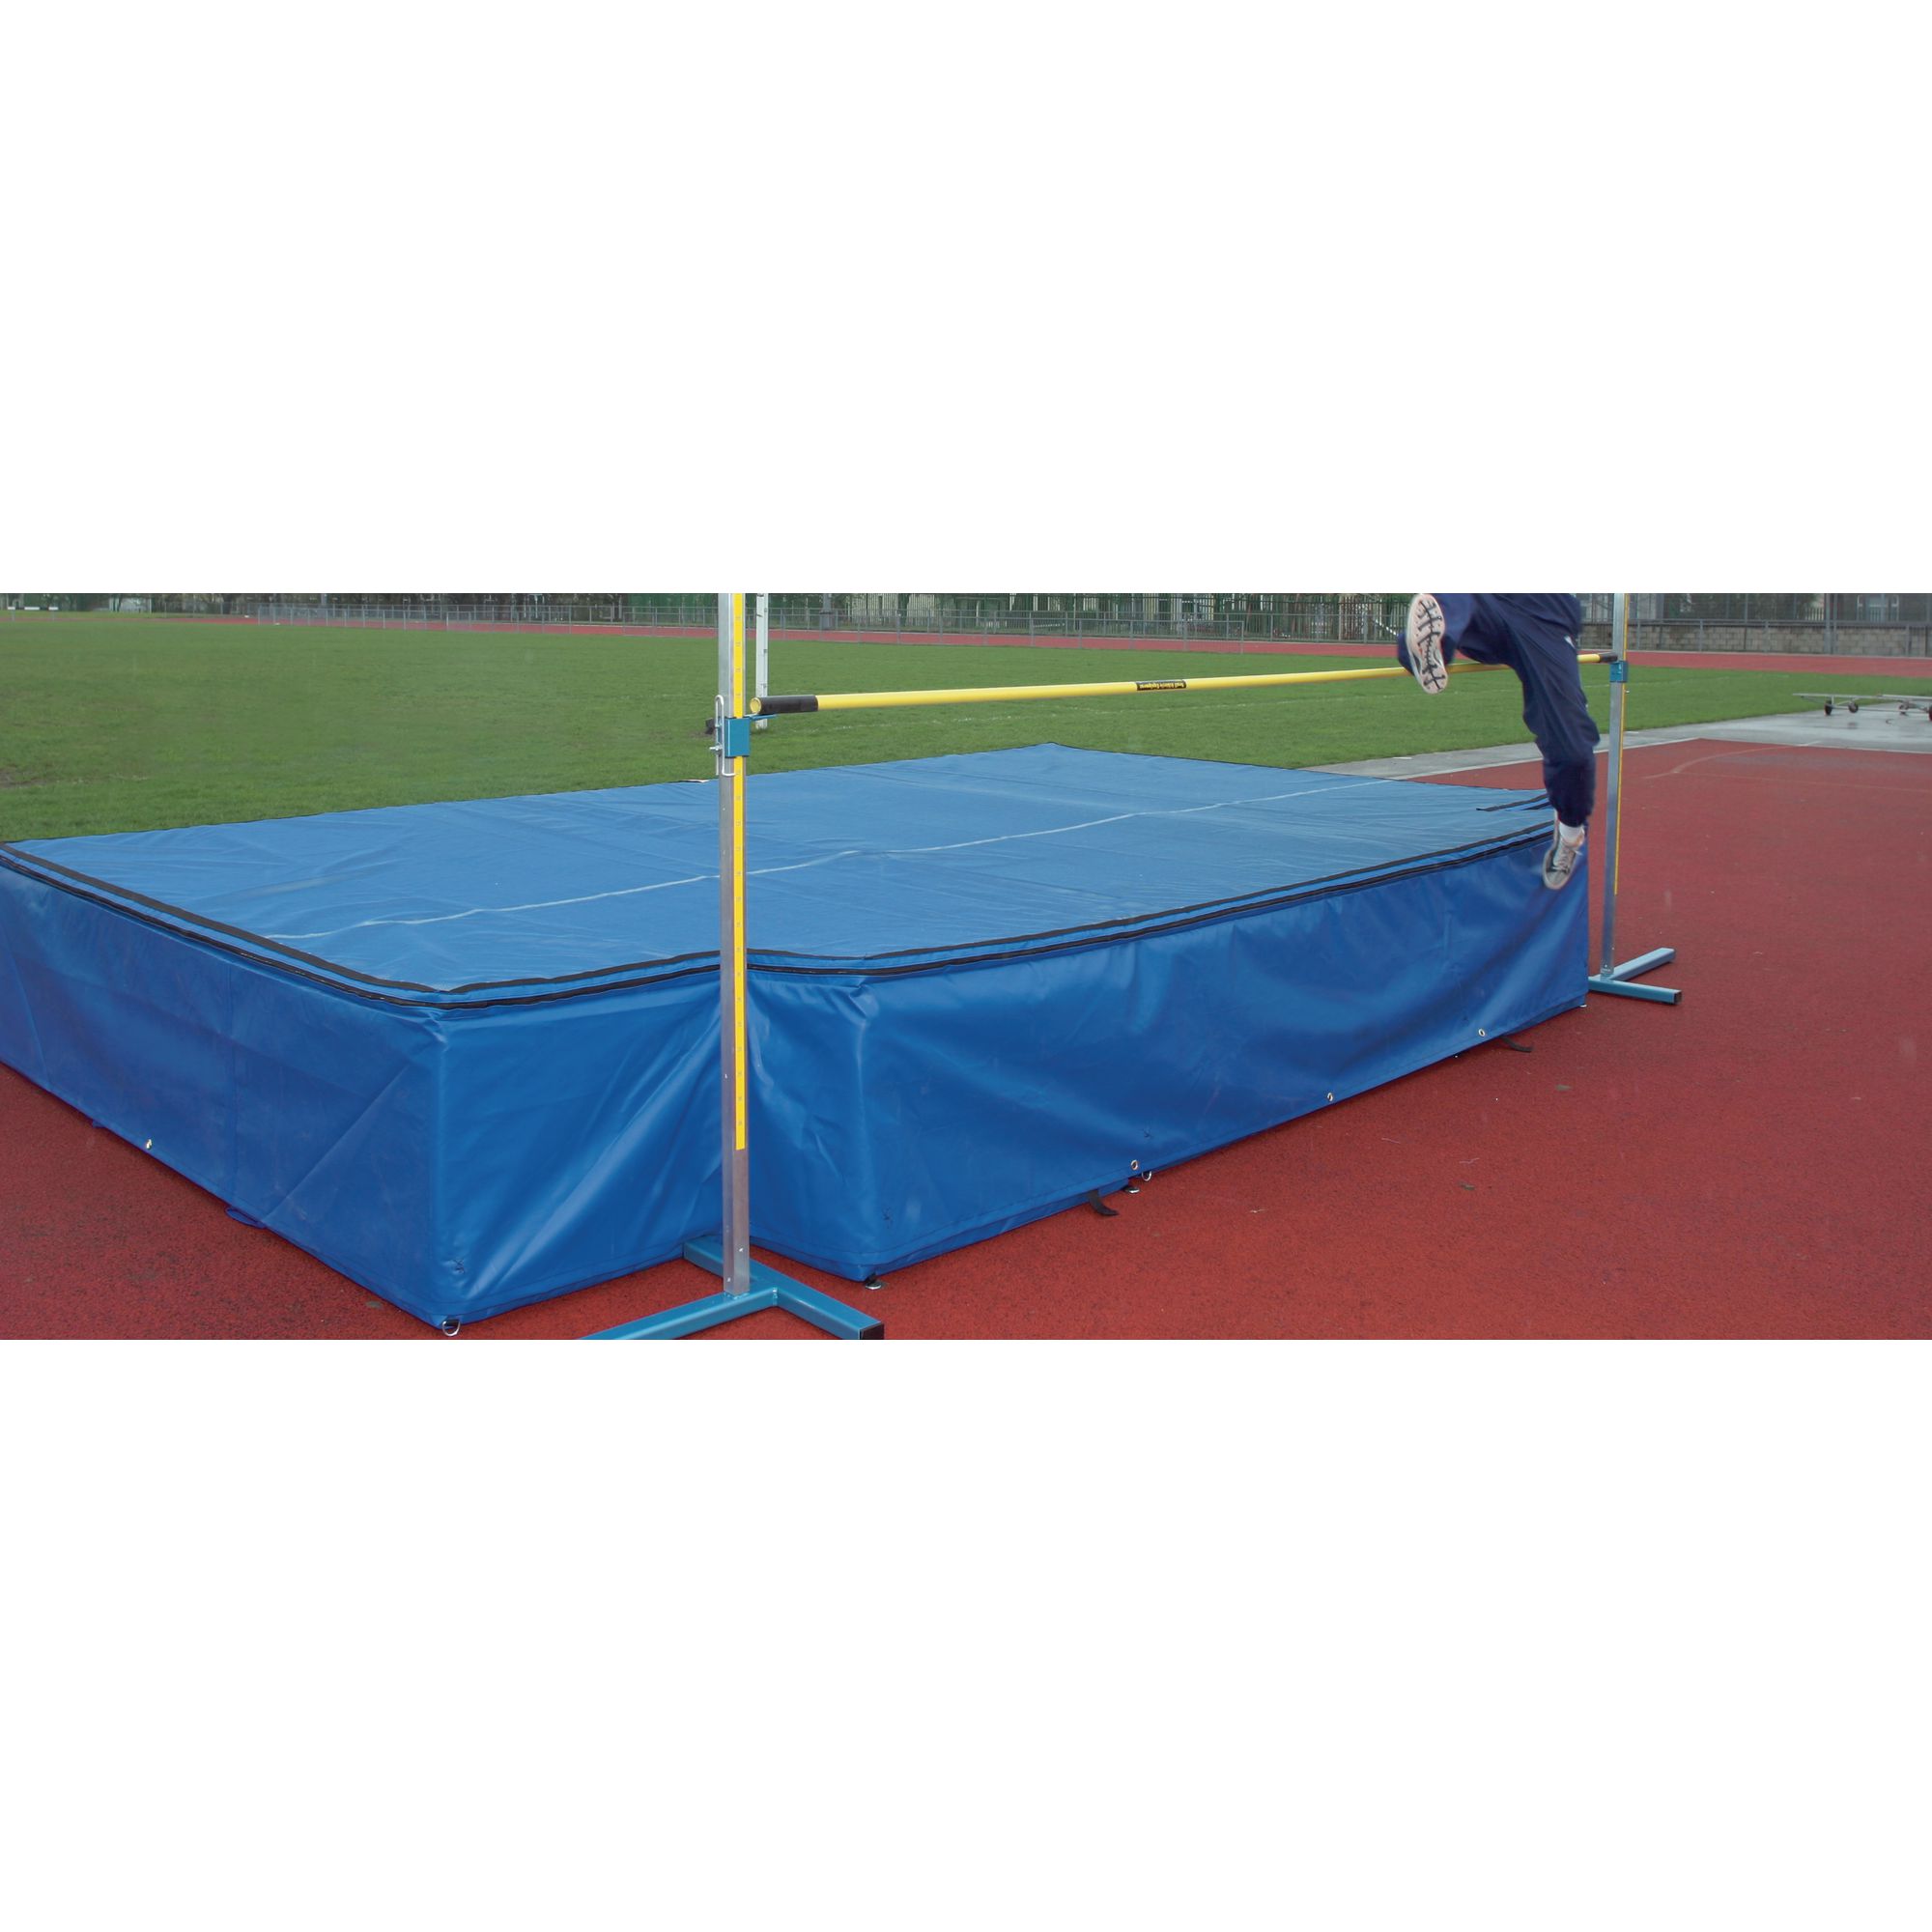 High Jump Landing Area With Cutouts